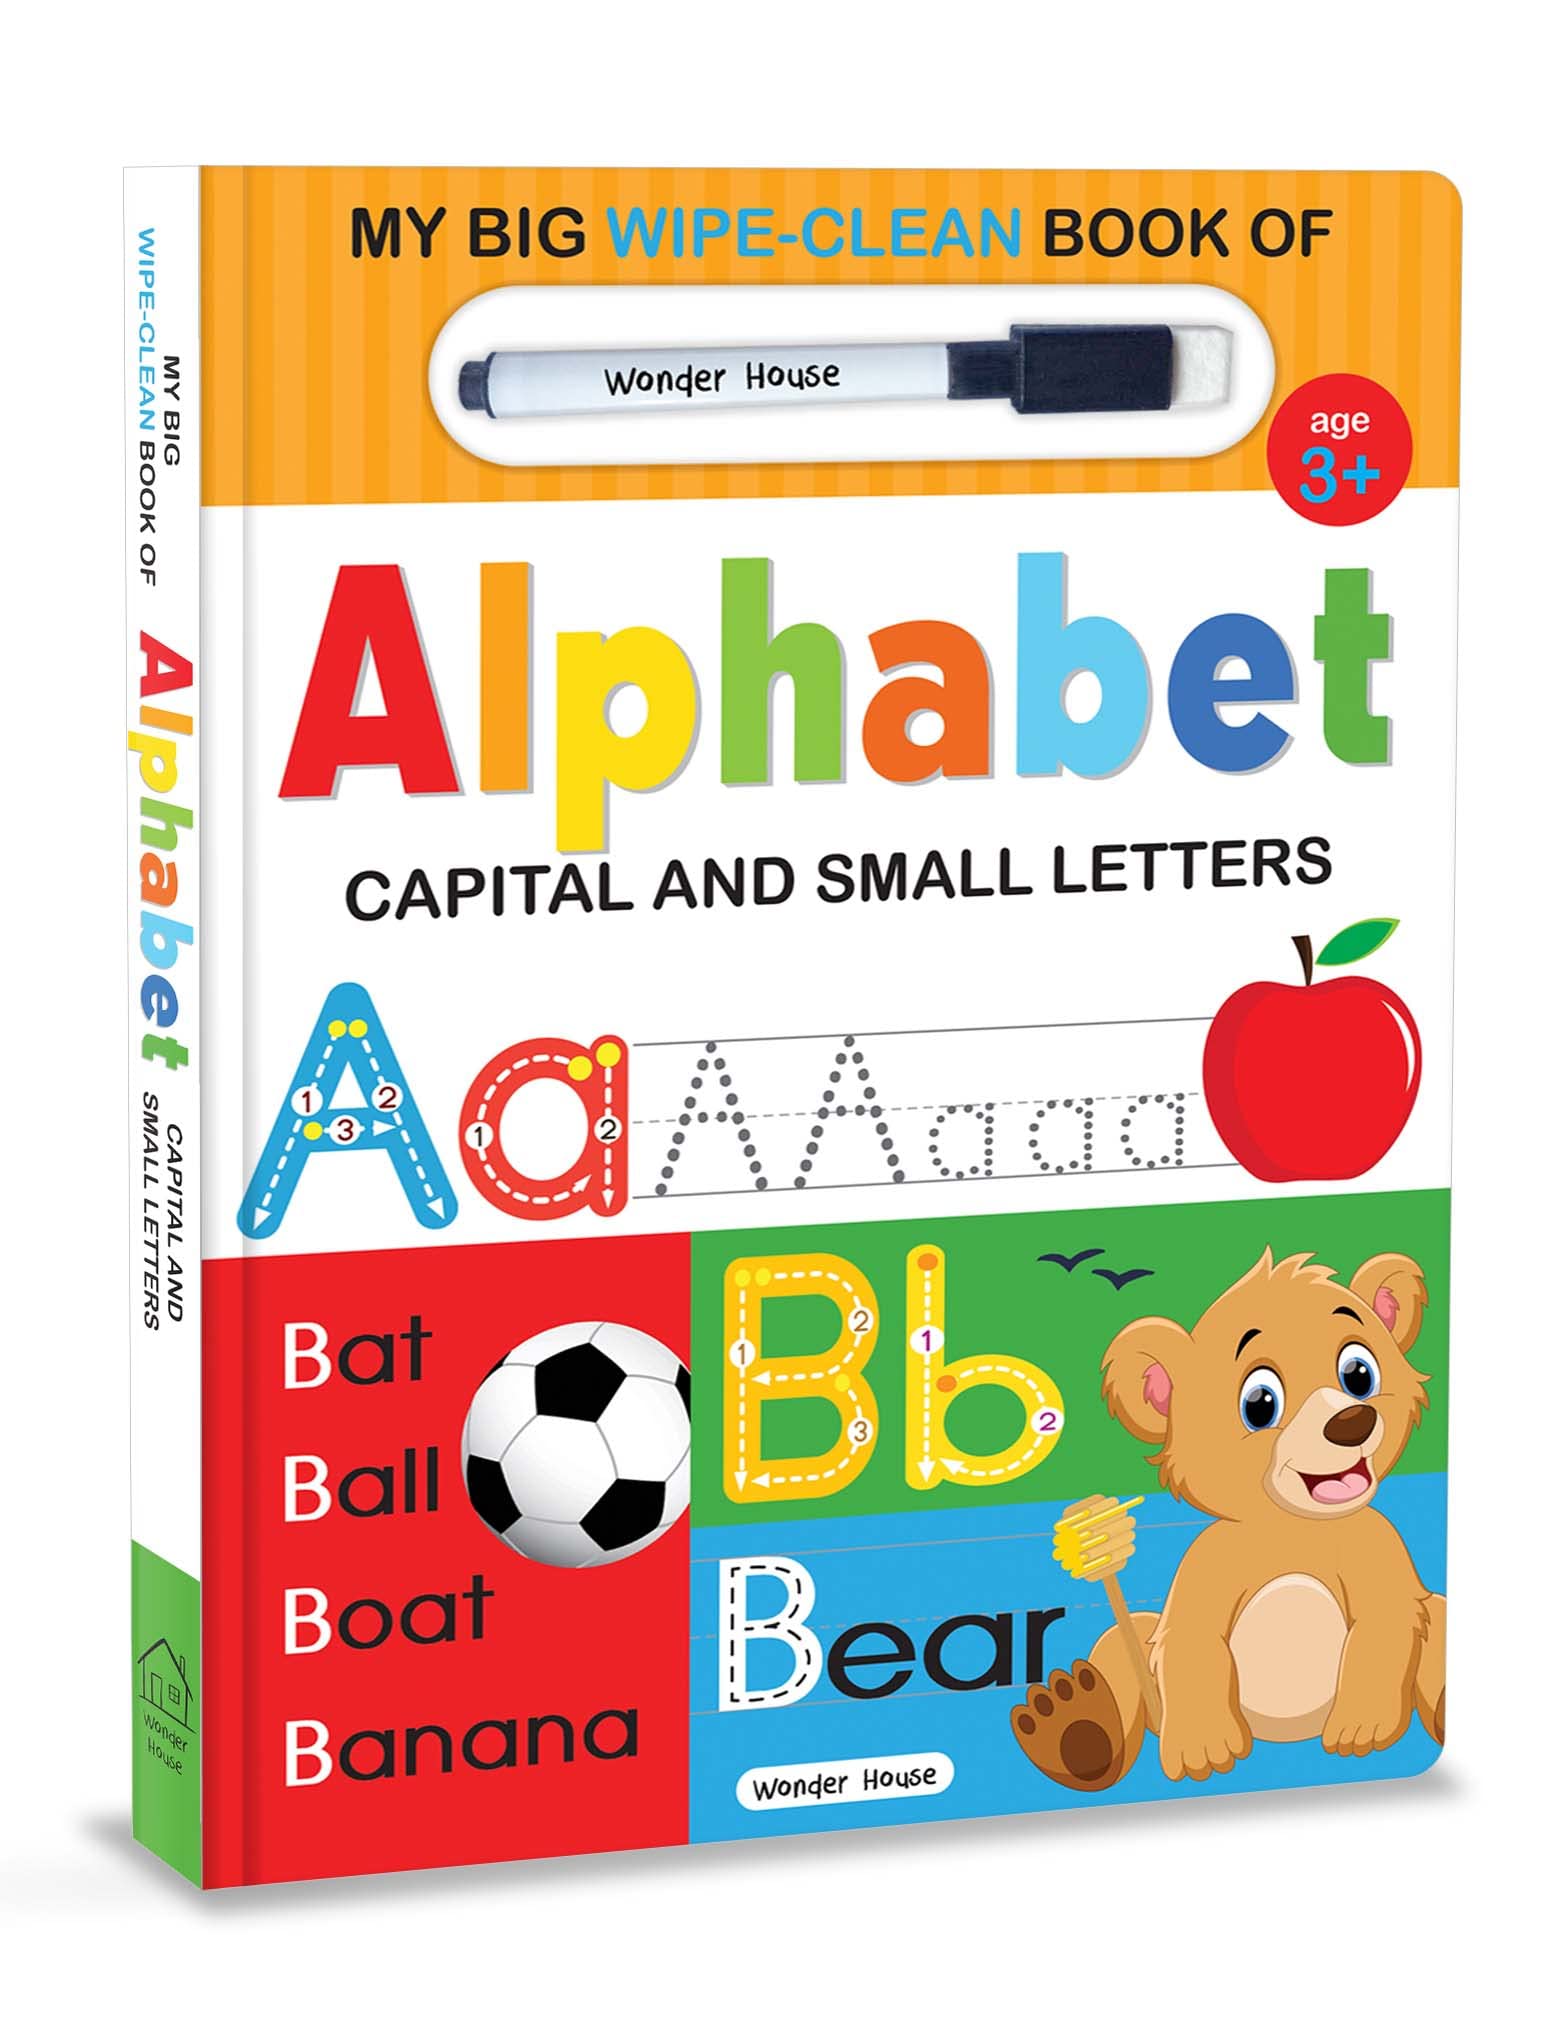 My Big Wipe And Clean Book of Alphabet for Kids : Capital And Small Letters Board book